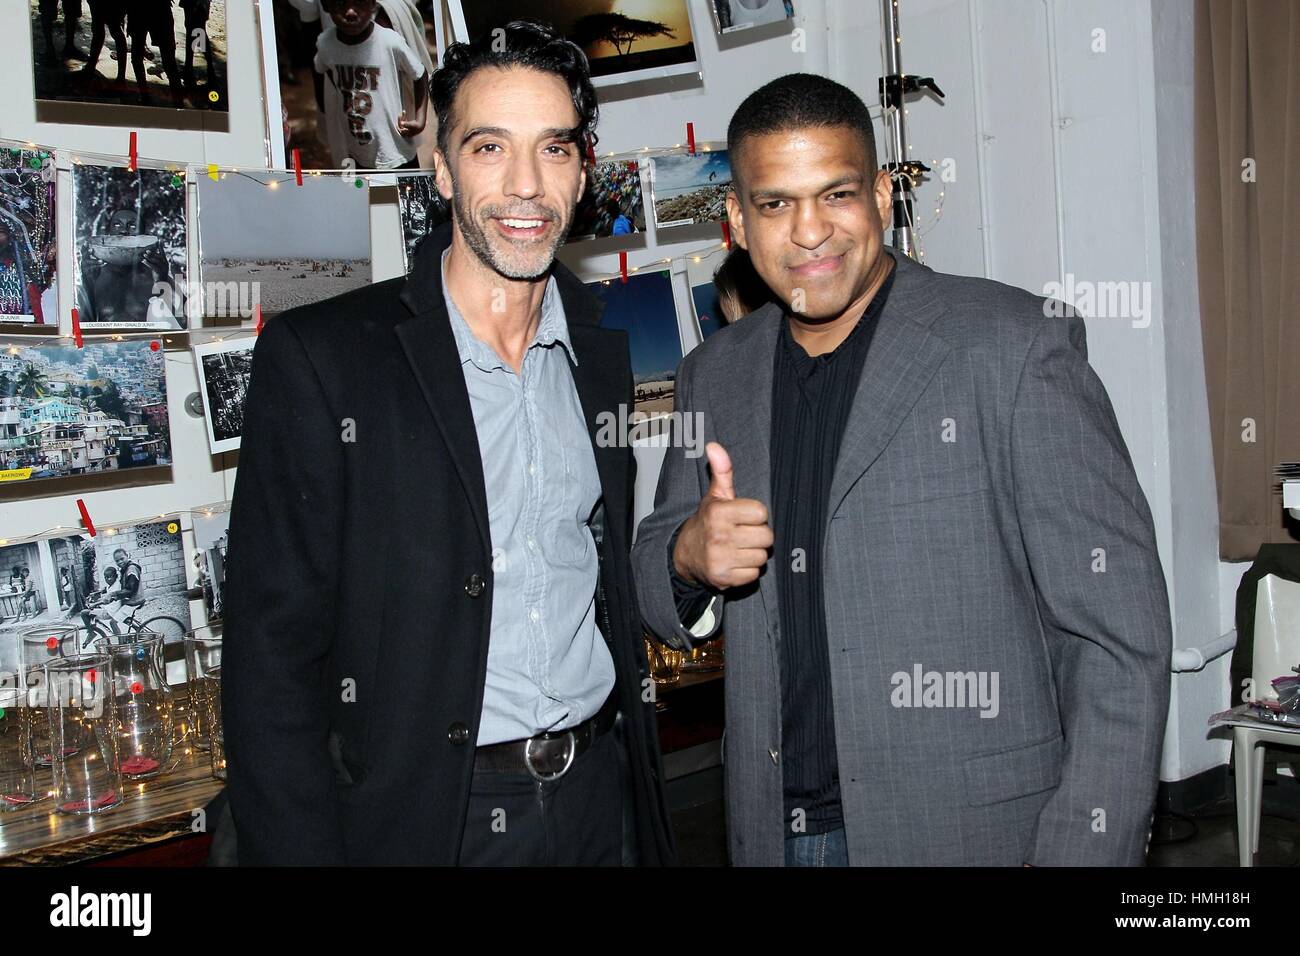 New York, NY, USA. 2nd Feb, 2017. Carlos Leon, Maurepaz Auguste in attendance for RE-TOUCH HAITI Charity Cocktail Party to Benefit The Artists Institute/Artists for Peace and Justice, Splashlight, New York, NY February 2, 2017. Credit: Steve Mack/Everett Collection/Alamy Live News Stock Photo